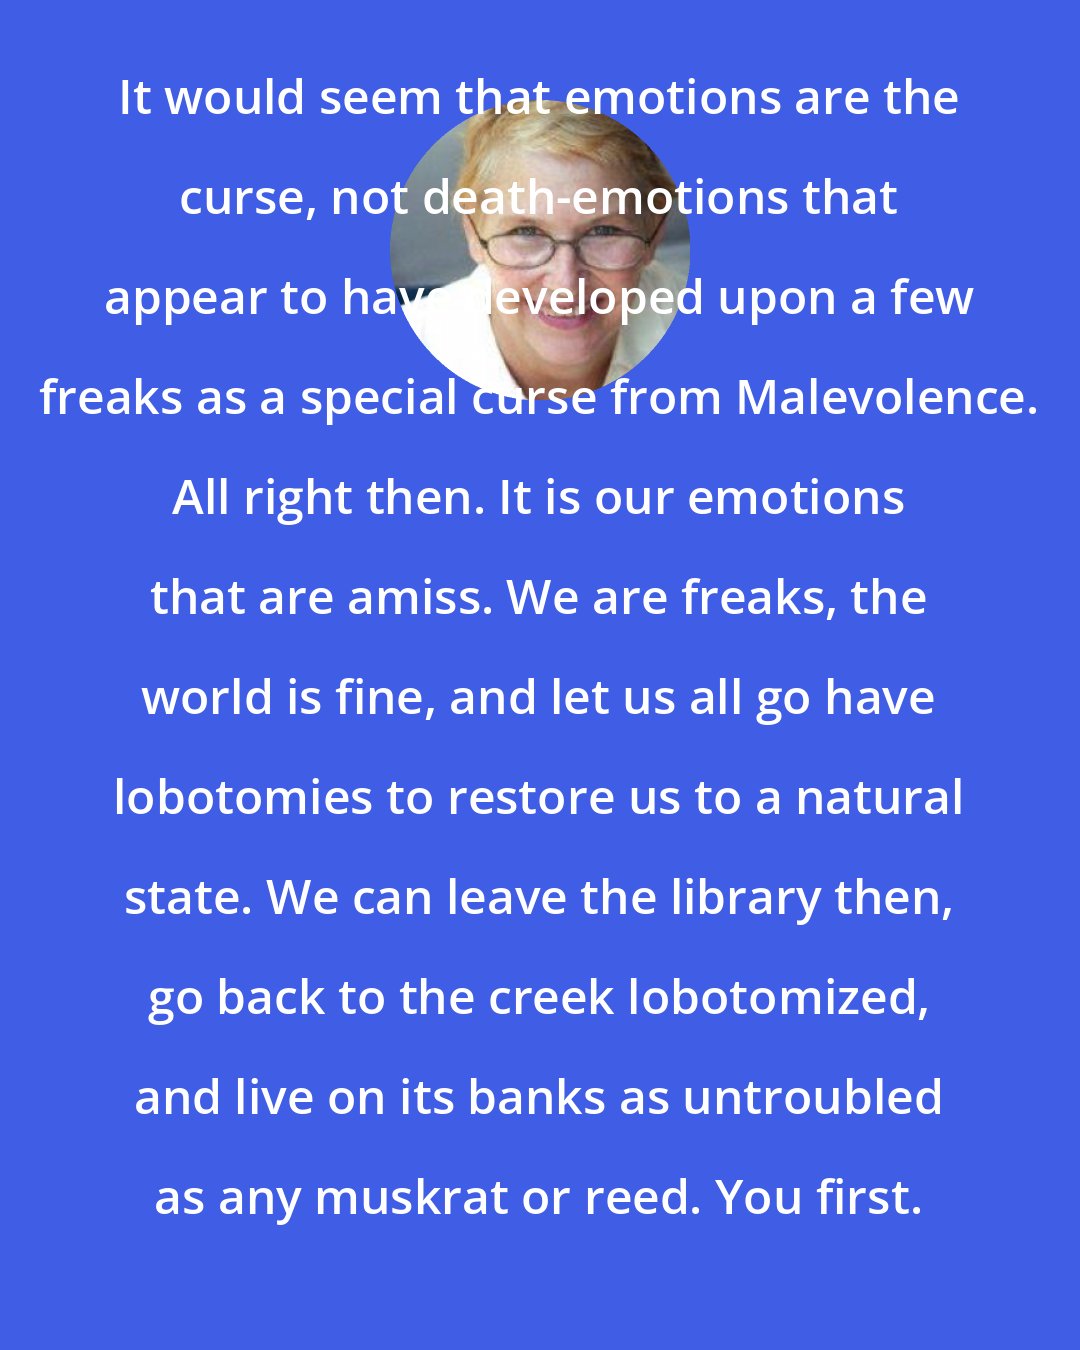 Annie Dillard: It would seem that emotions are the curse, not death-emotions that appear to have developed upon a few freaks as a special curse from Malevolence. All right then. It is our emotions that are amiss. We are freaks, the world is fine, and let us all go have lobotomies to restore us to a natural state. We can leave the library then, go back to the creek lobotomized, and live on its banks as untroubled as any muskrat or reed. You first.